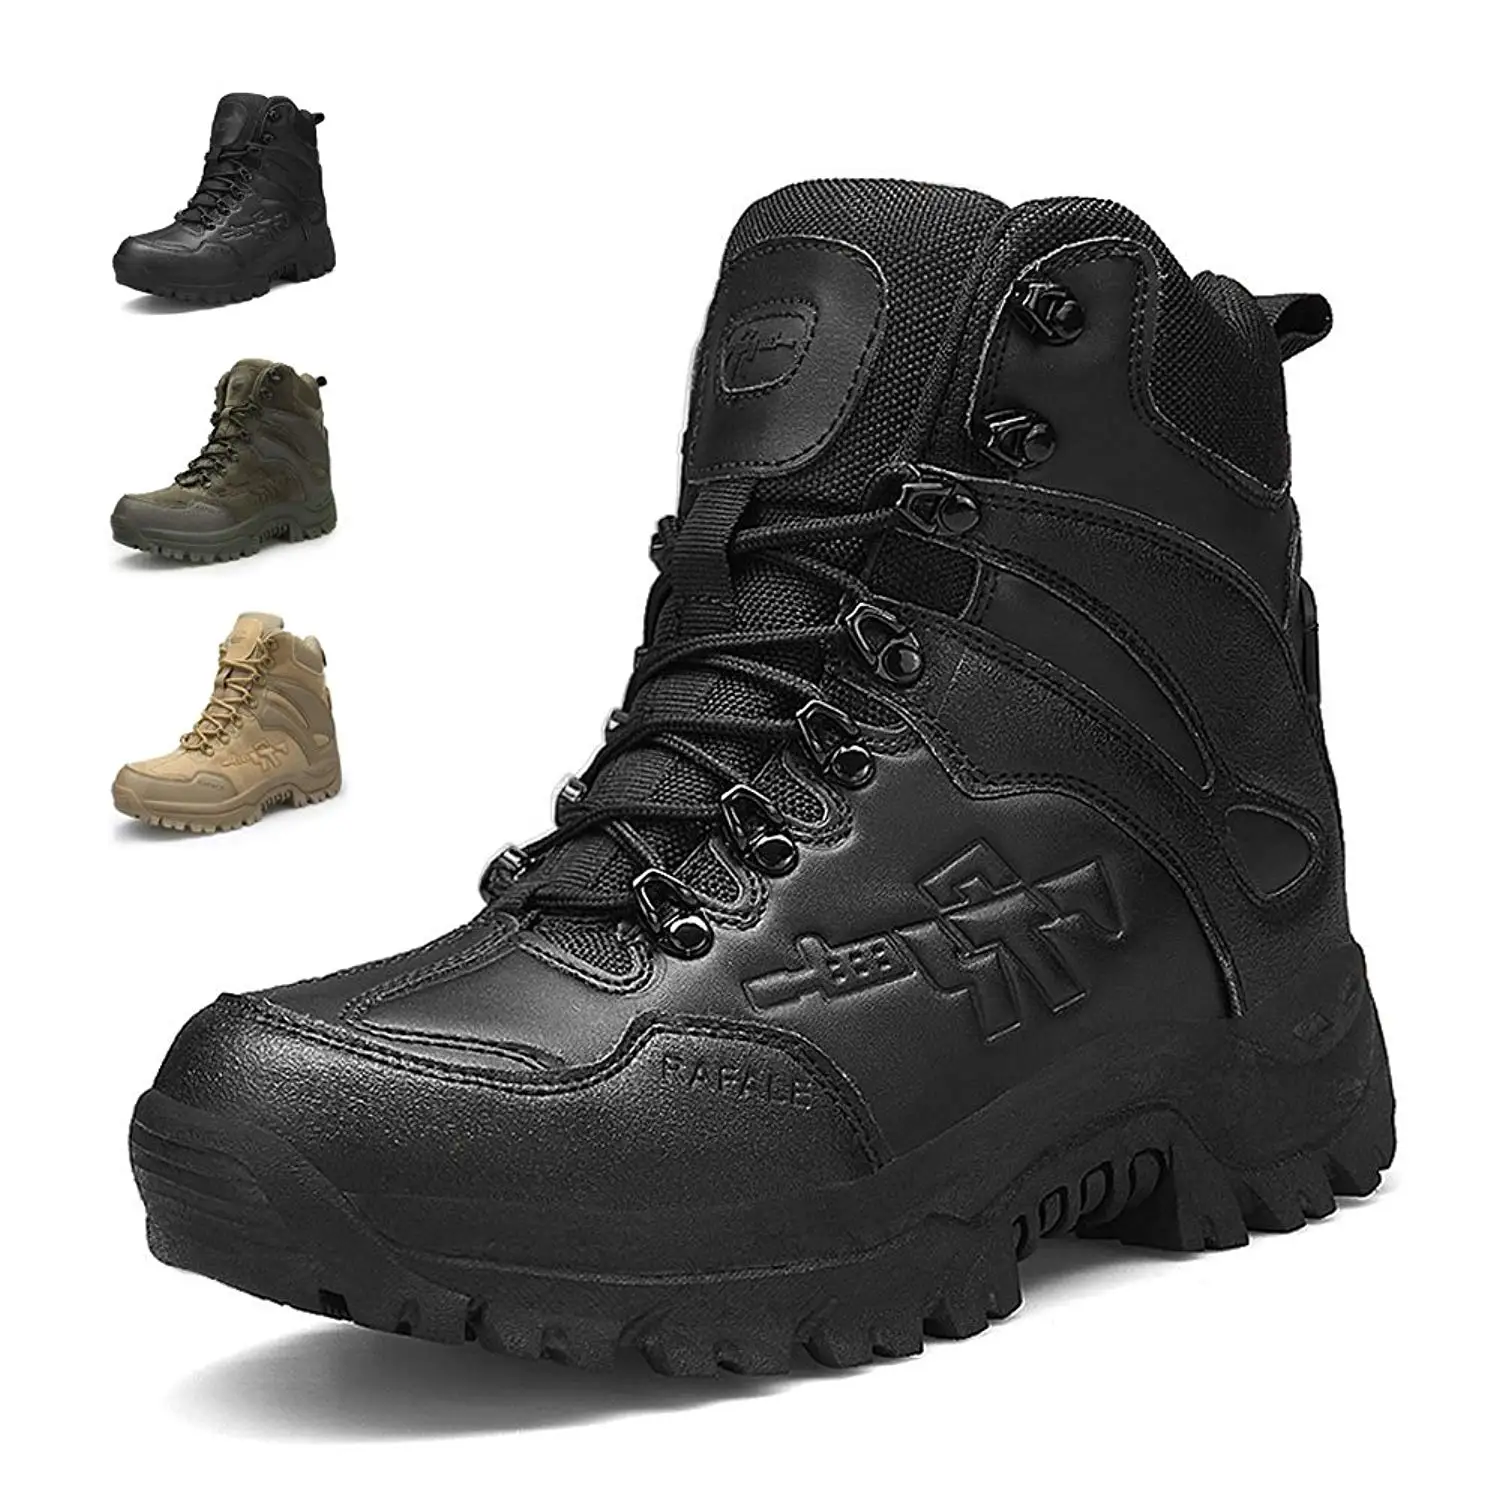 composite military boots